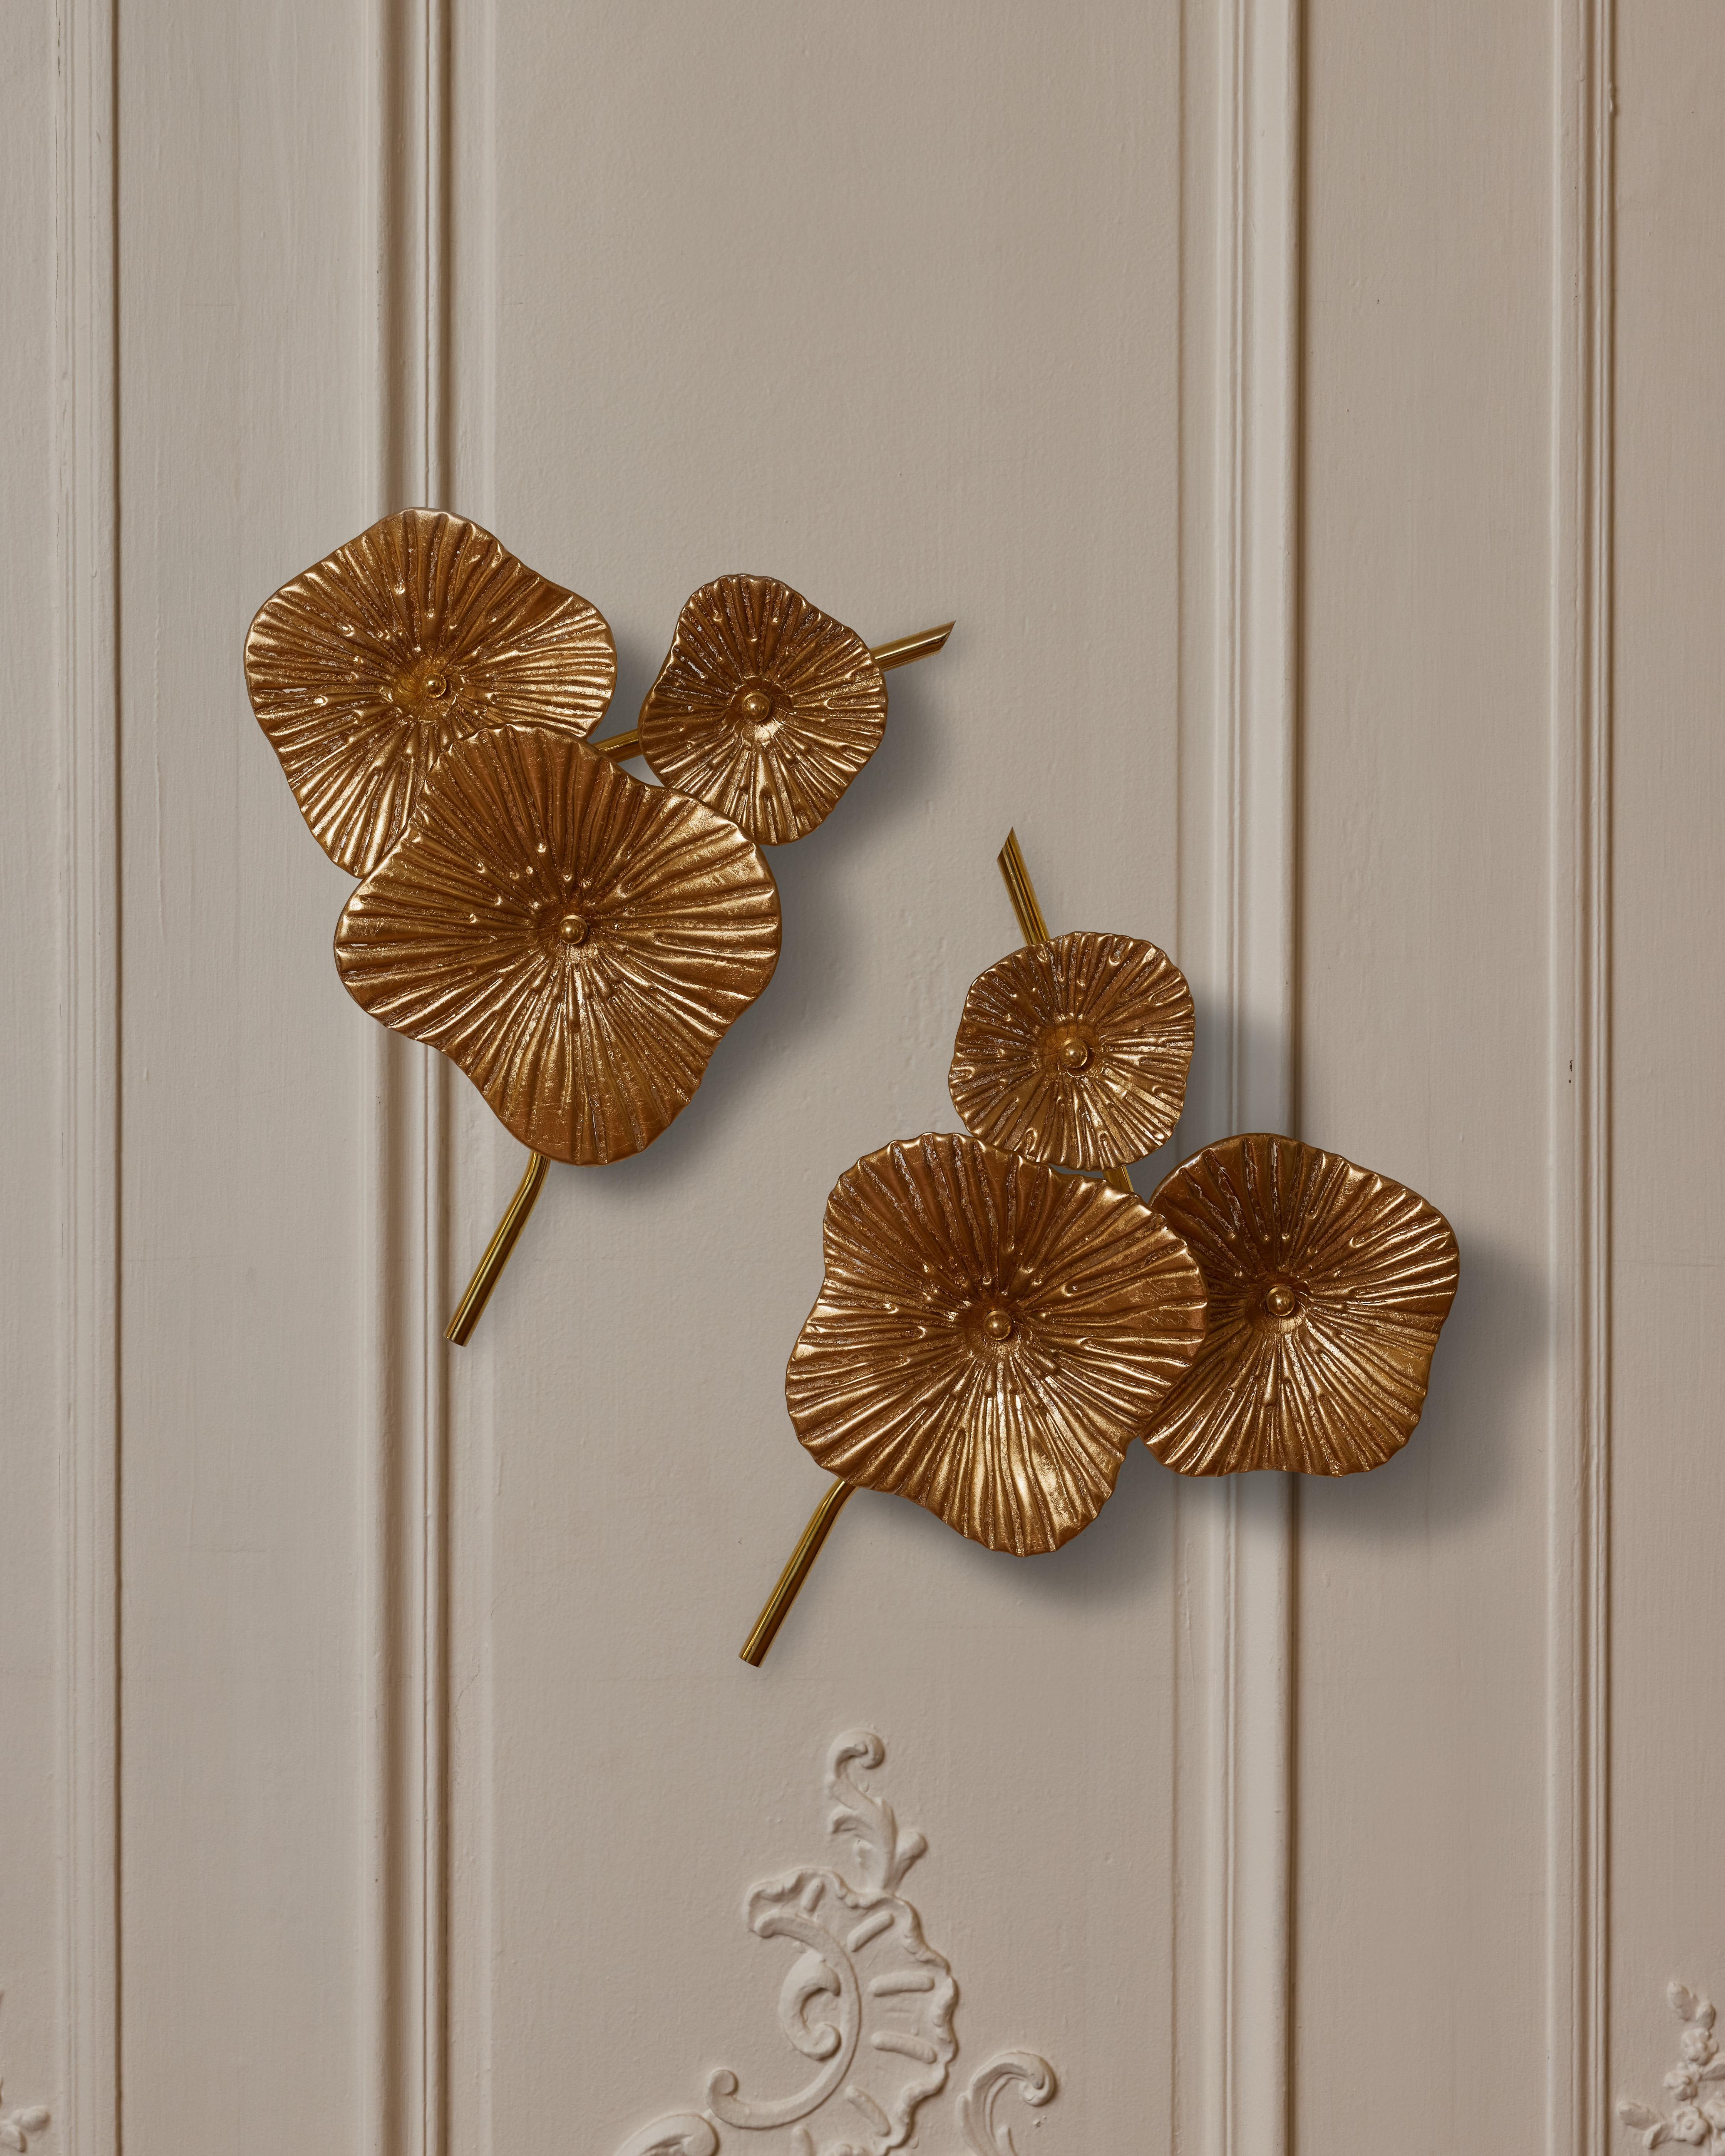 Brass sconces with flowers in sculpted Murano glass, gilt with gold leaf.
Creation by Studio Glustin.
Italy, 2023.